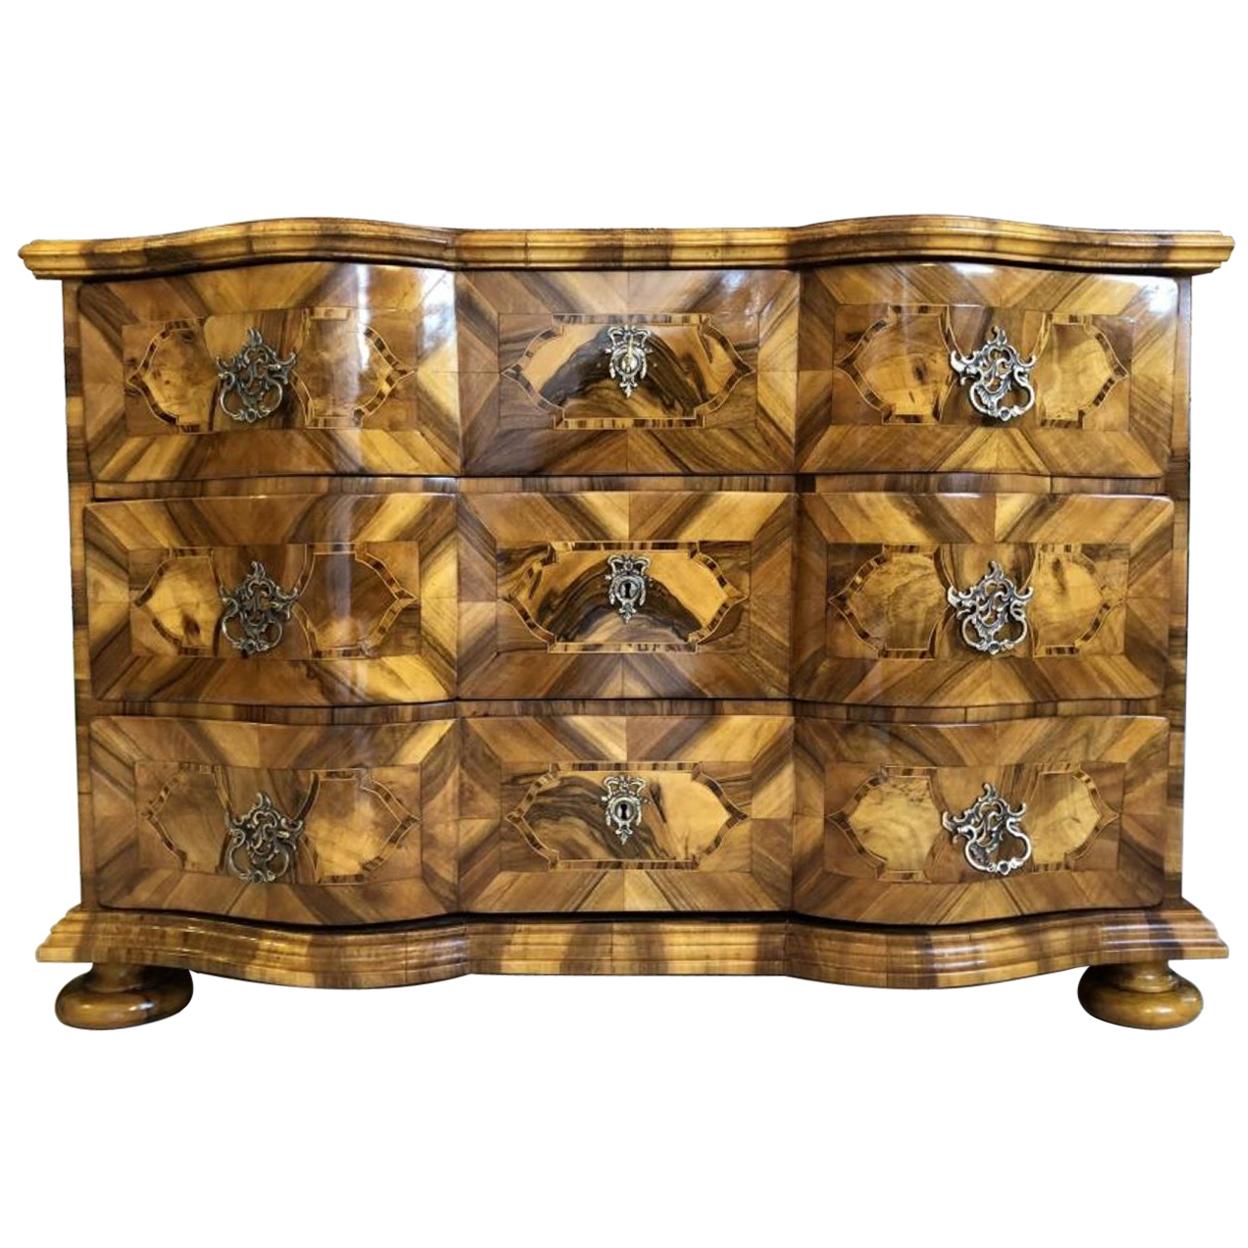 Baroque Chest of Drawers with Dreamlike Walnut Veneered Marquetry